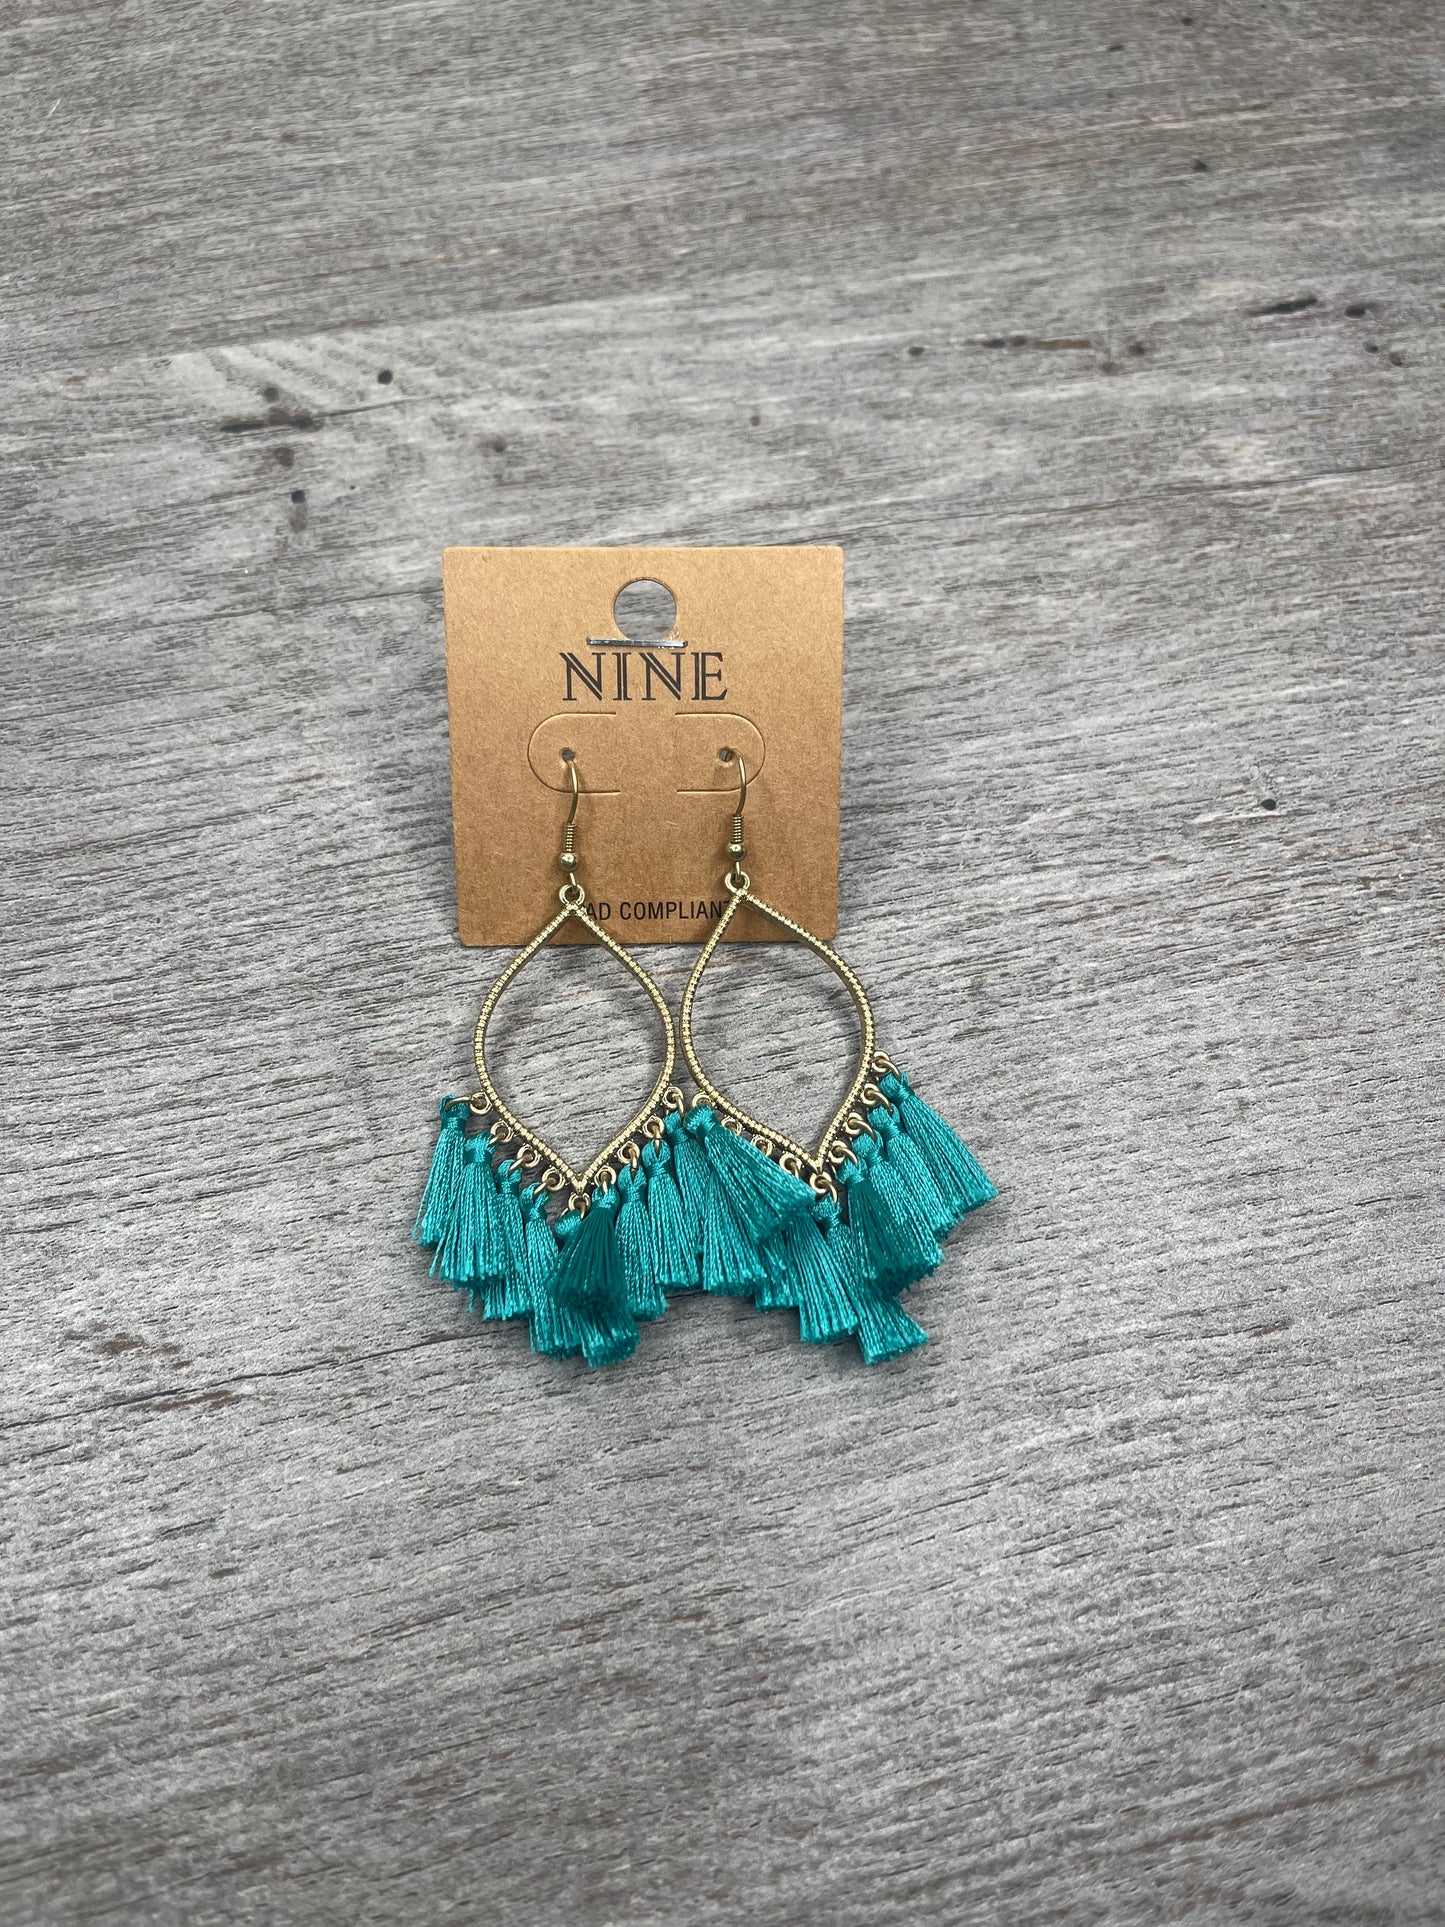 Come Back Home Earrings {Multiple Styles Available}